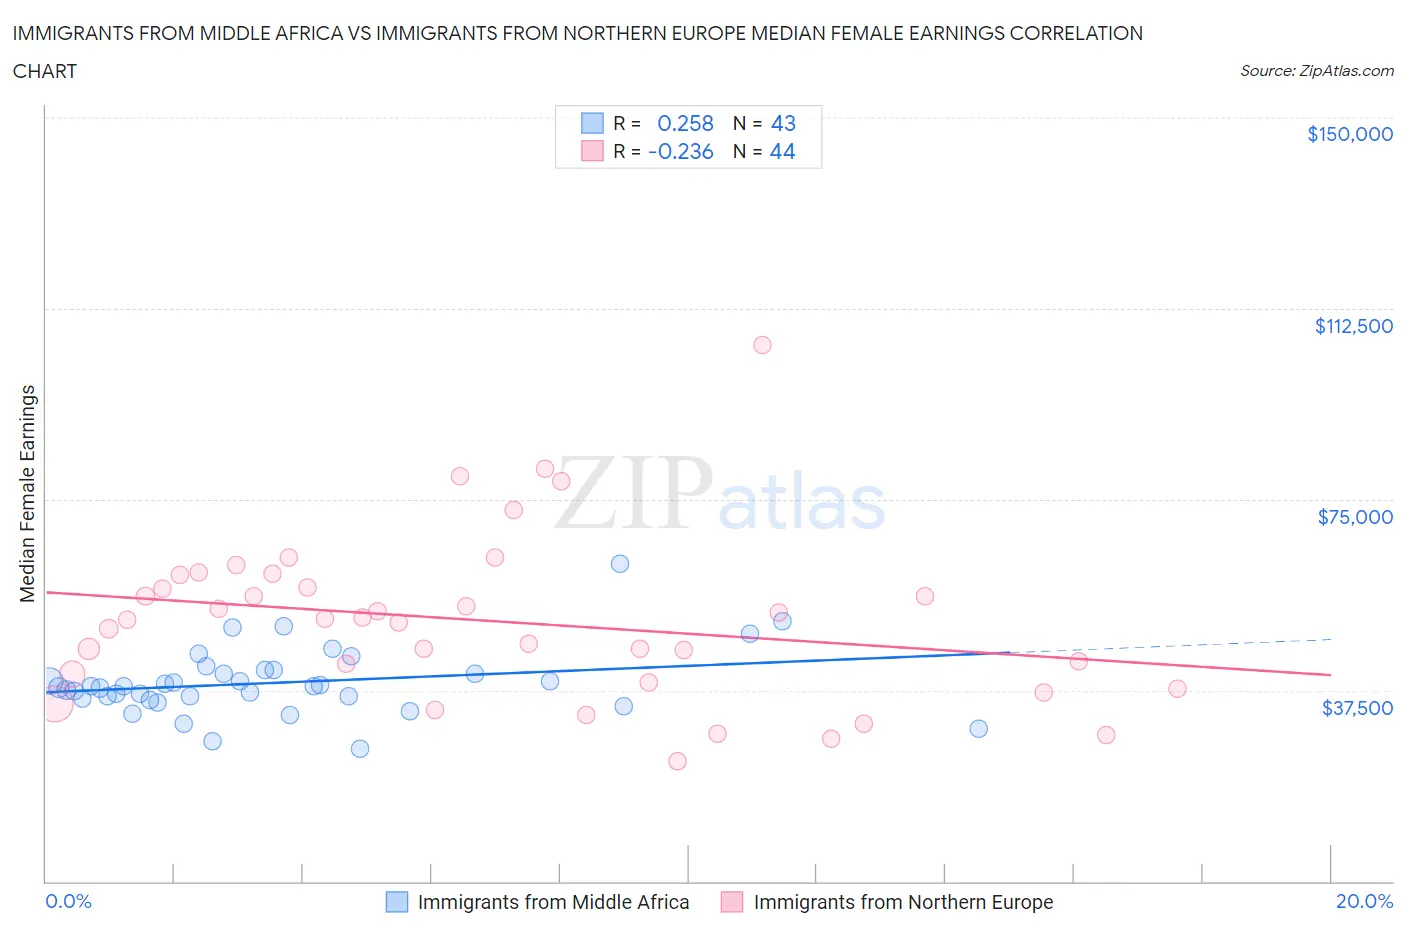 Immigrants from Middle Africa vs Immigrants from Northern Europe Median Female Earnings